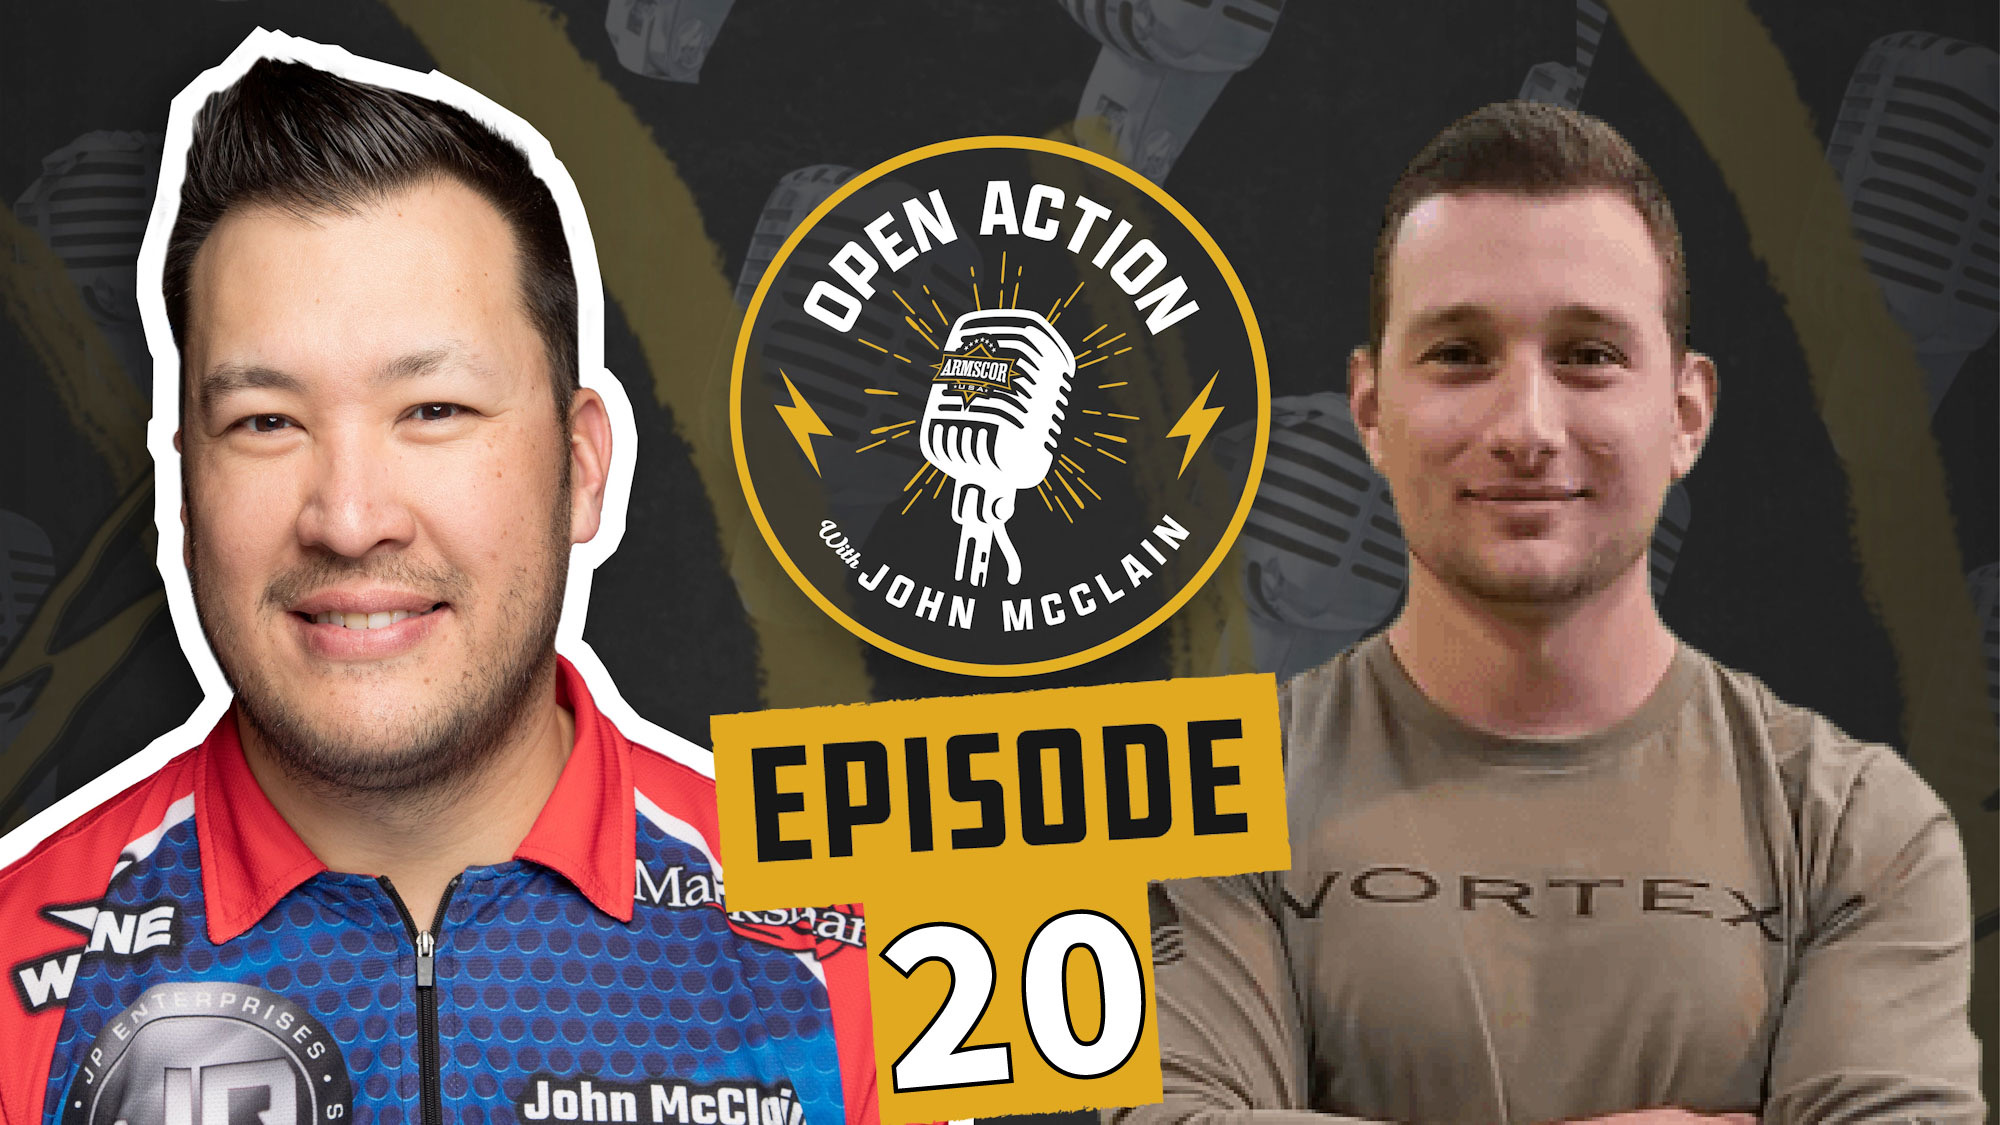 Armscor Open Action Podcast with John McClain & guest Cody Leeper